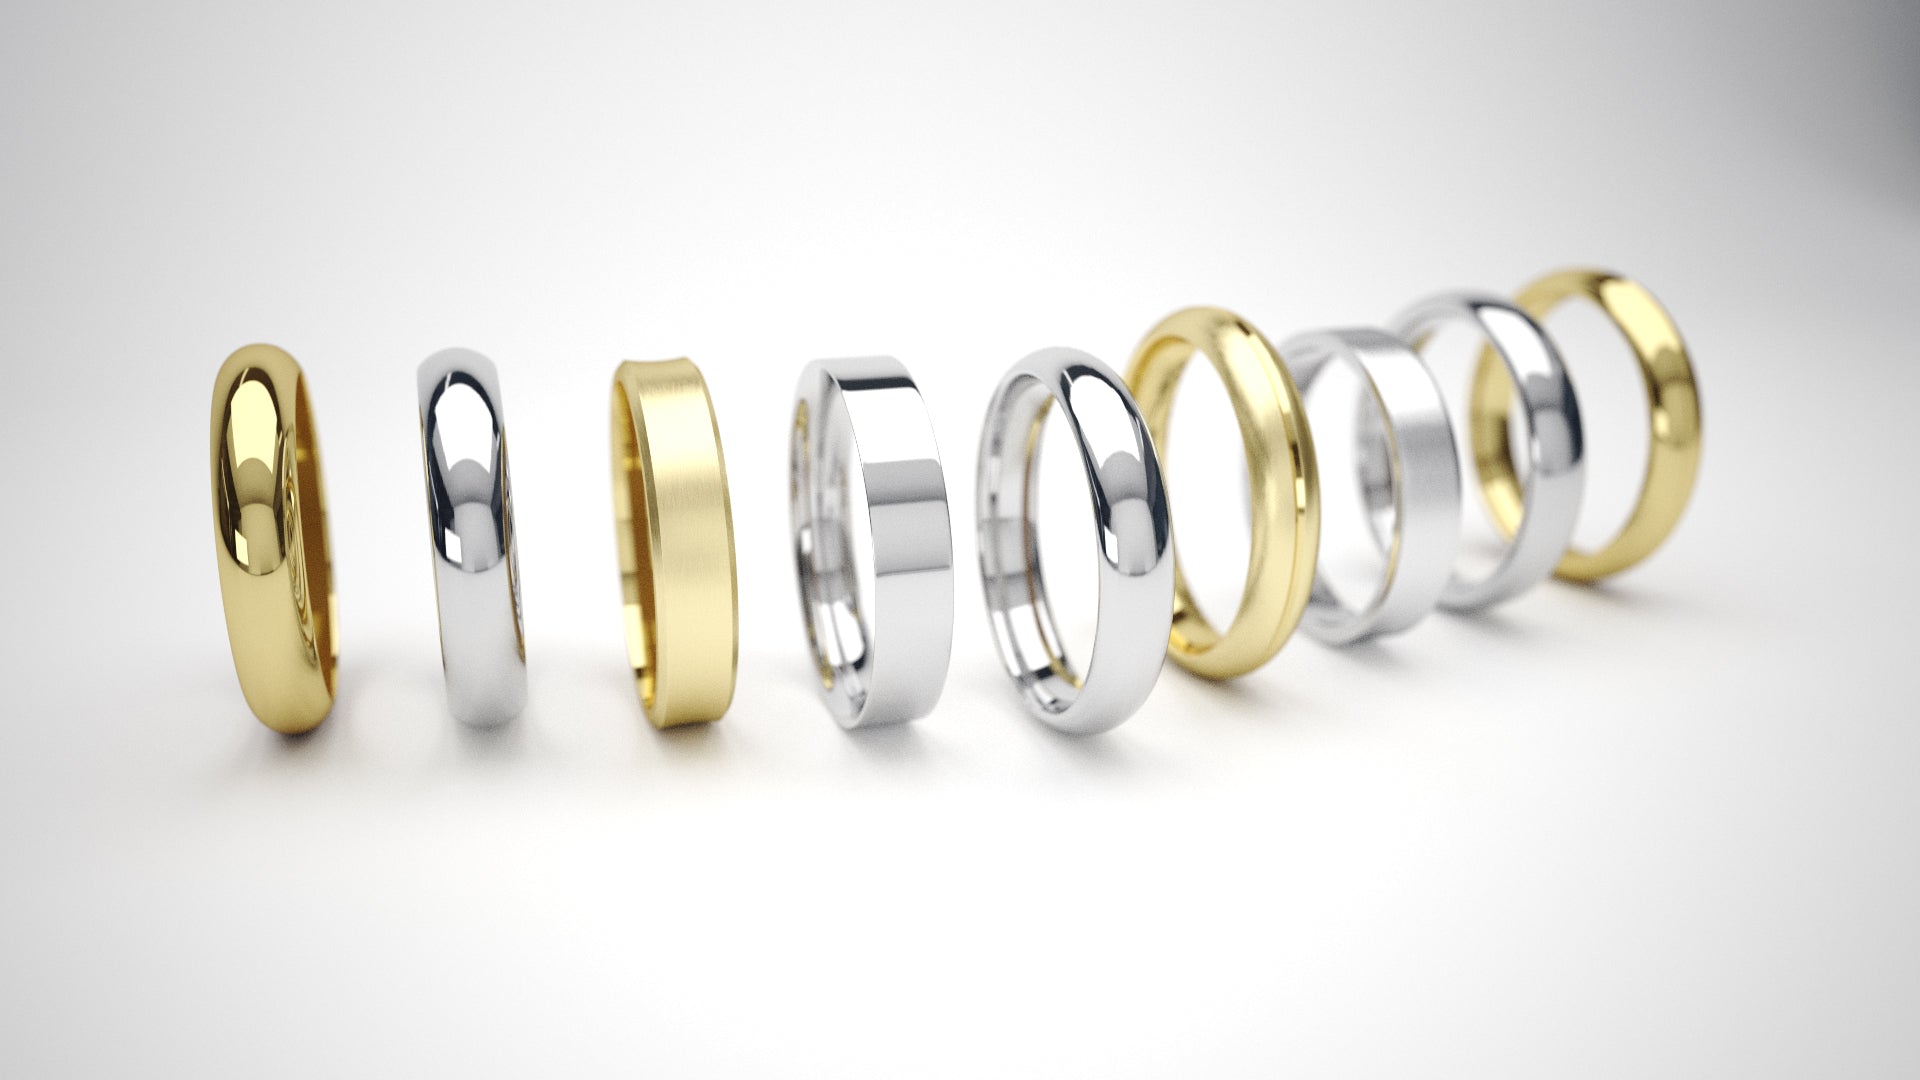 What is a reasonable amount to spend on a wedding ring?